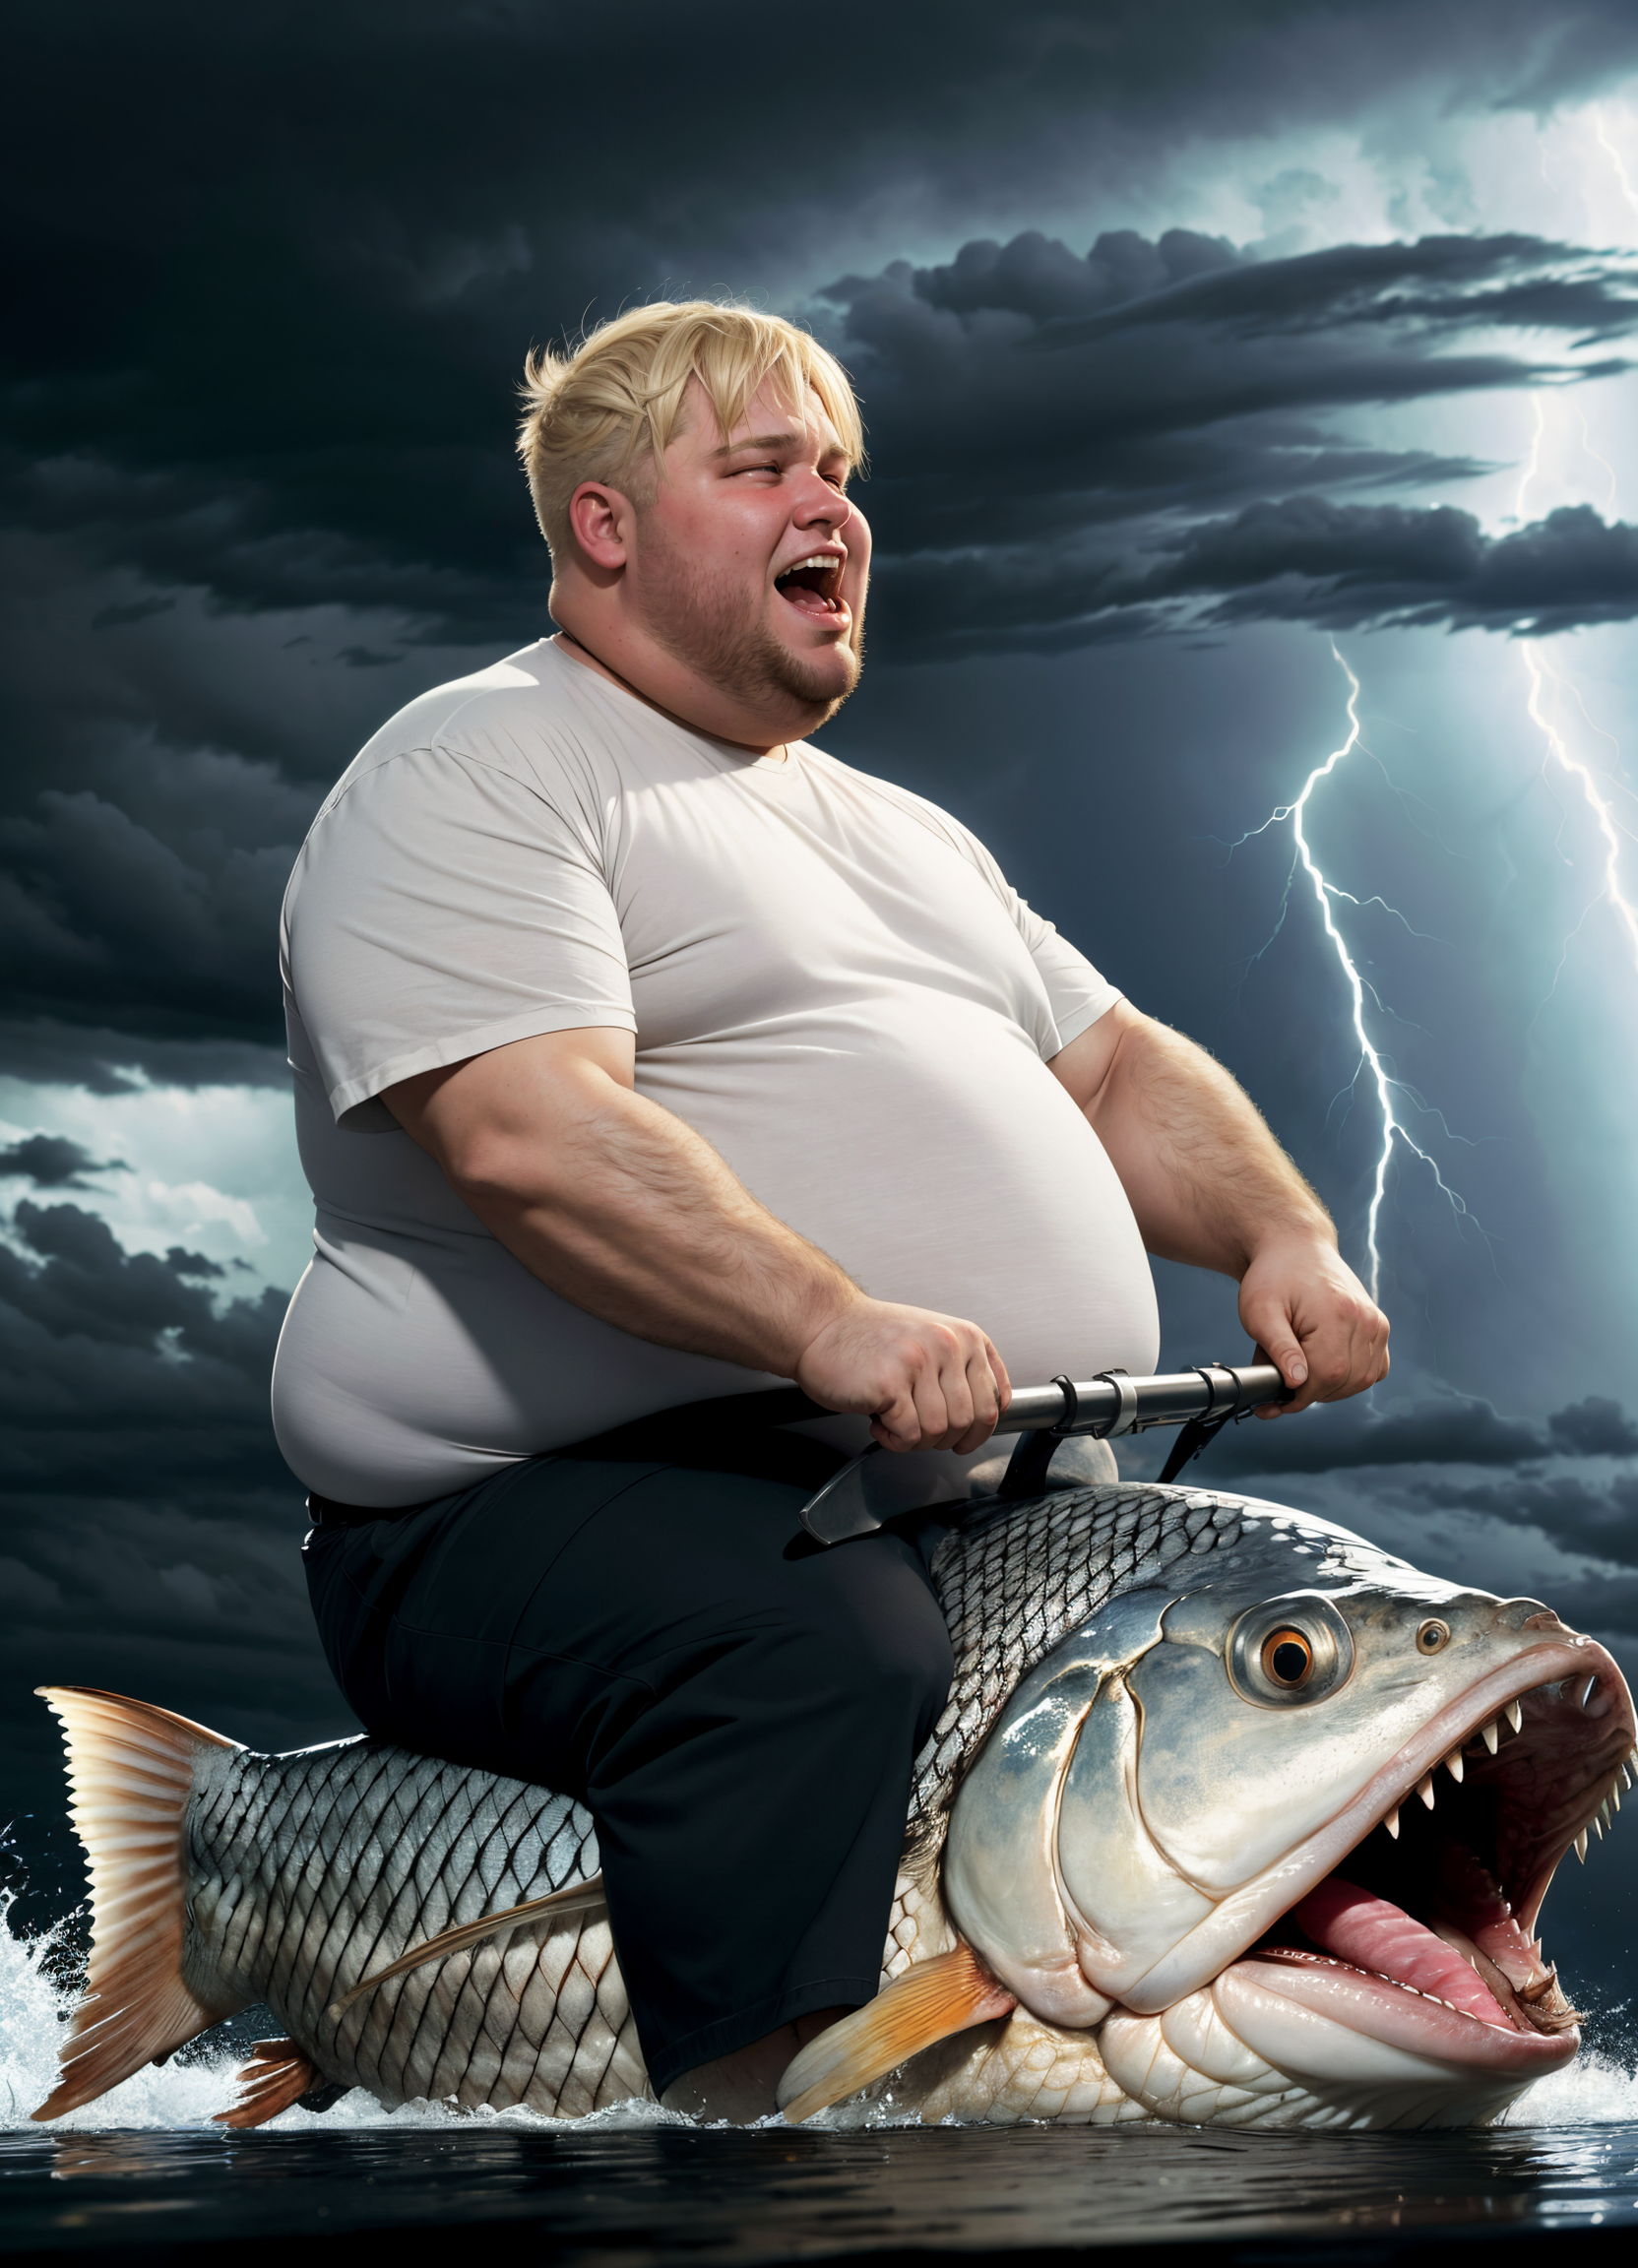 Man Riding Fish with Open Mouth and Thunderstorm Background